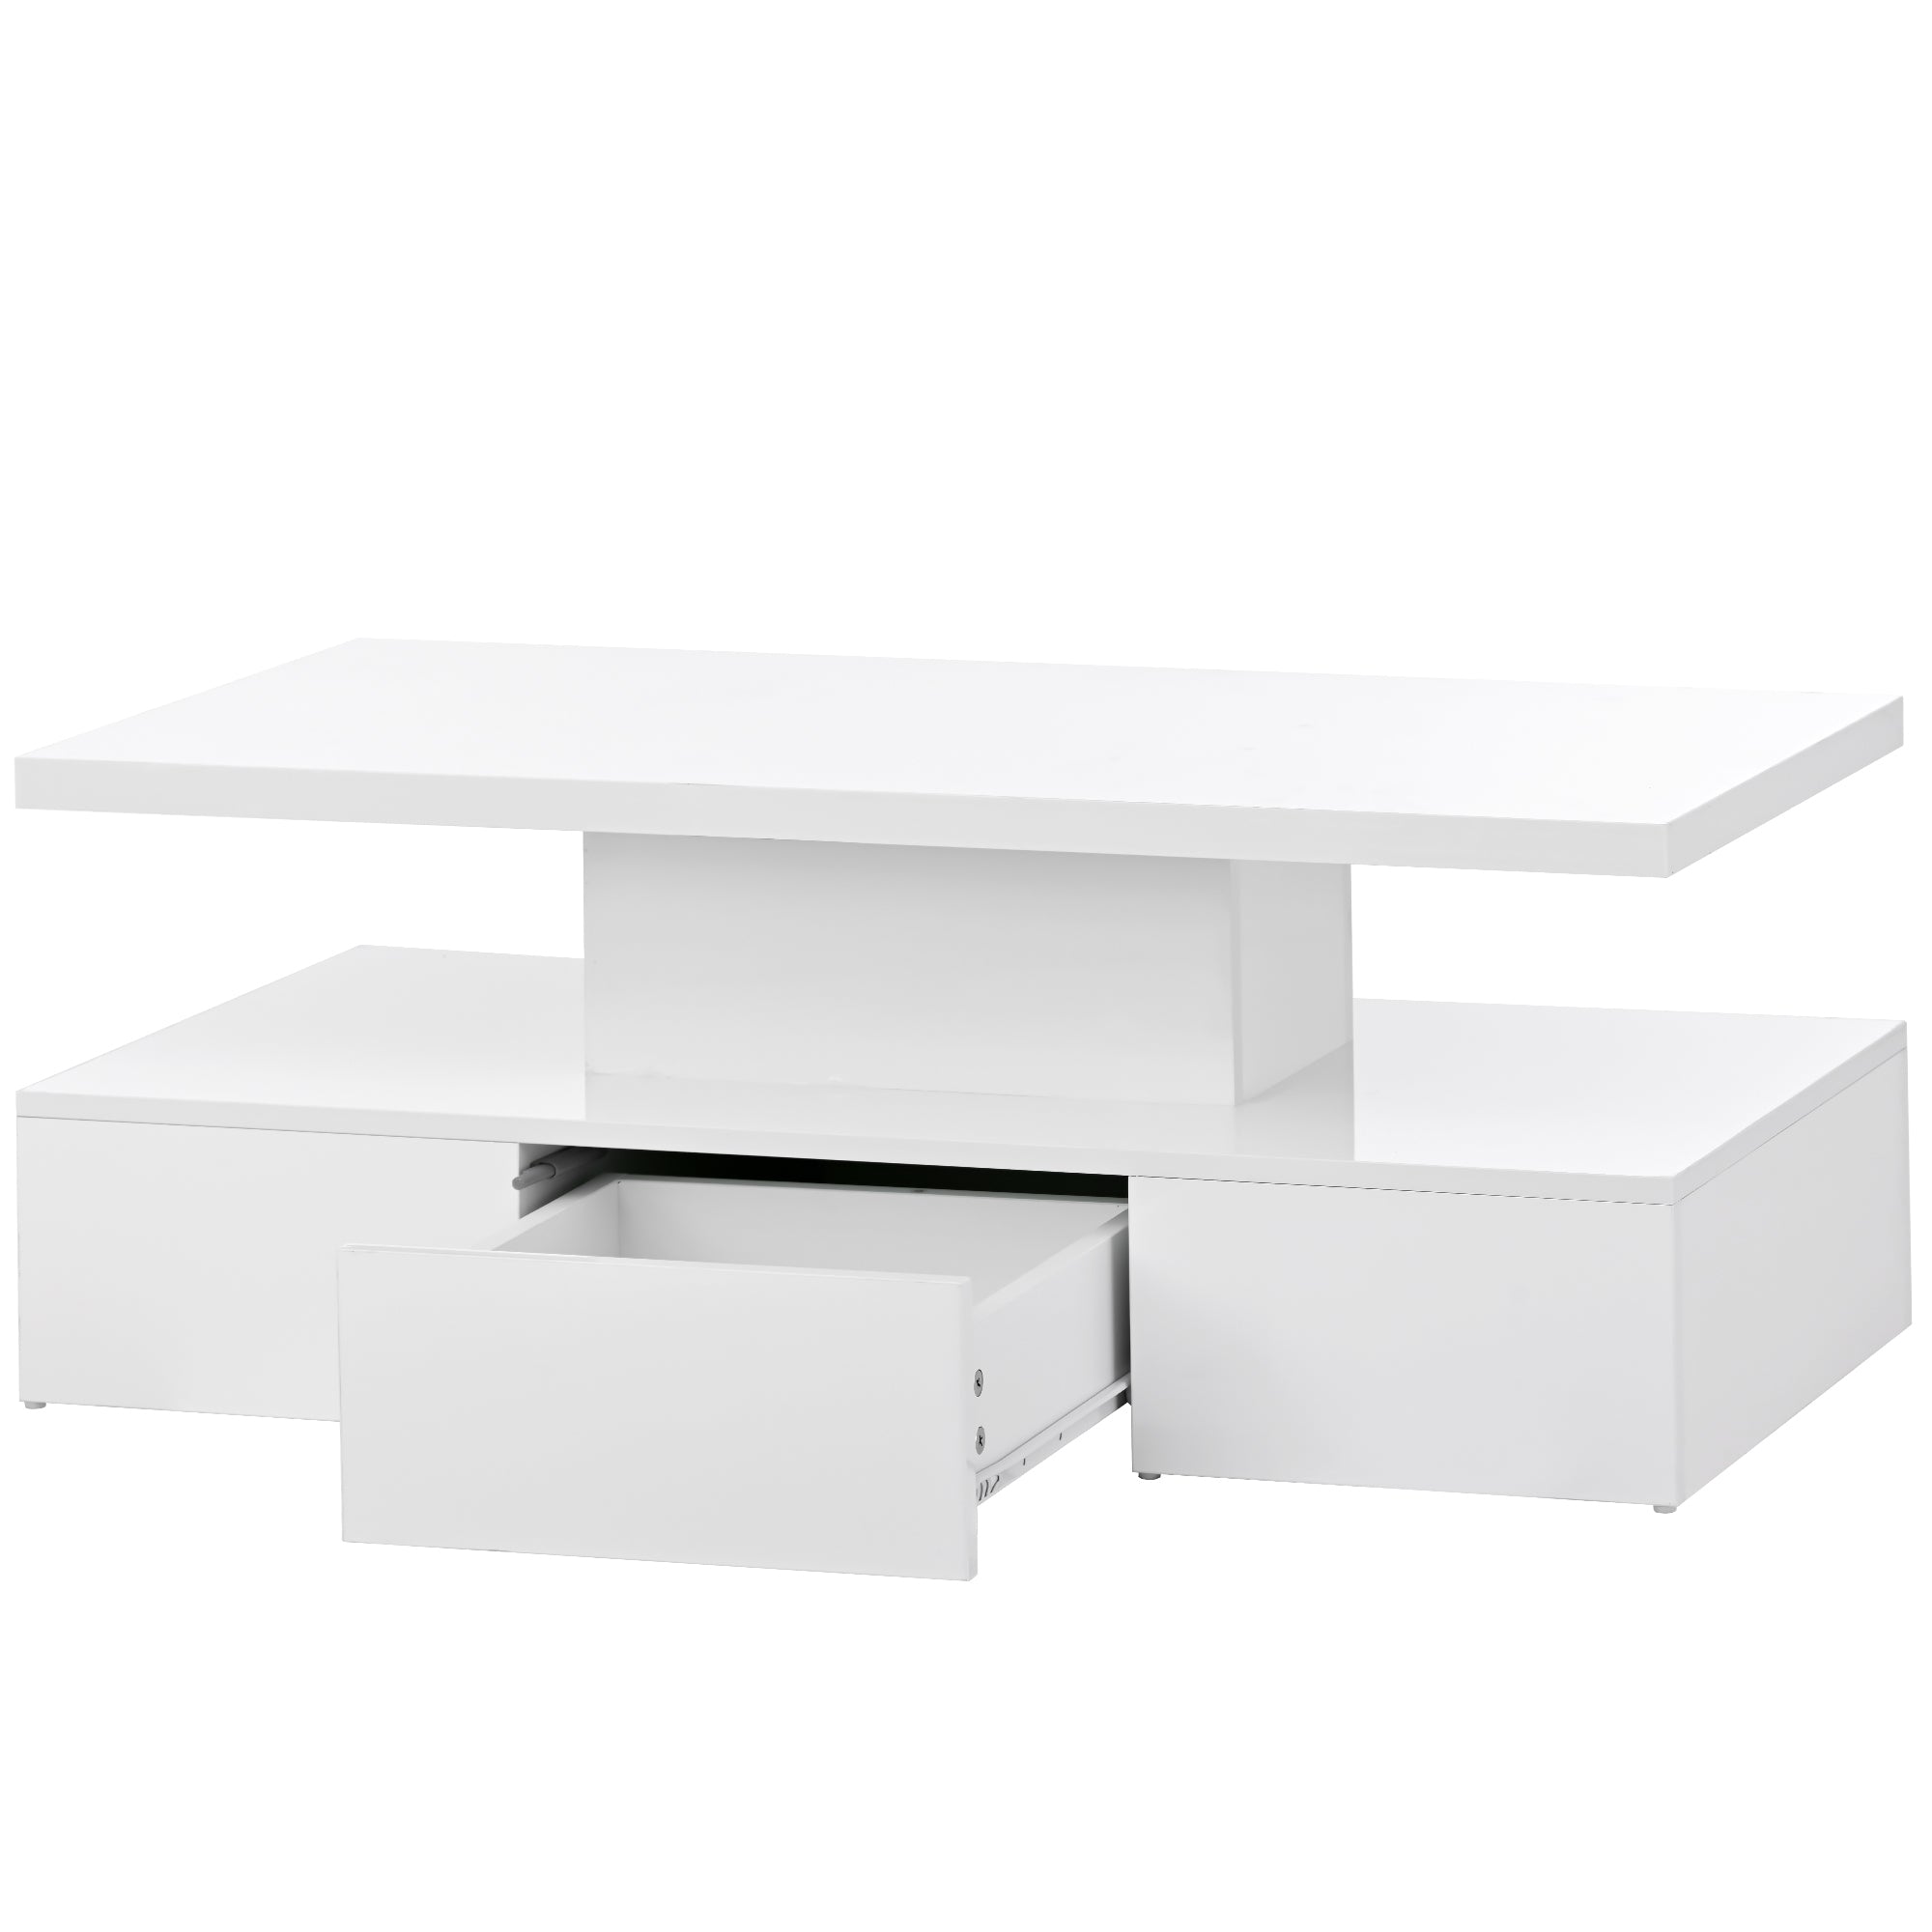 ON TREND Modern Glossy Coffee Table With Drawer, 2 white-particle board